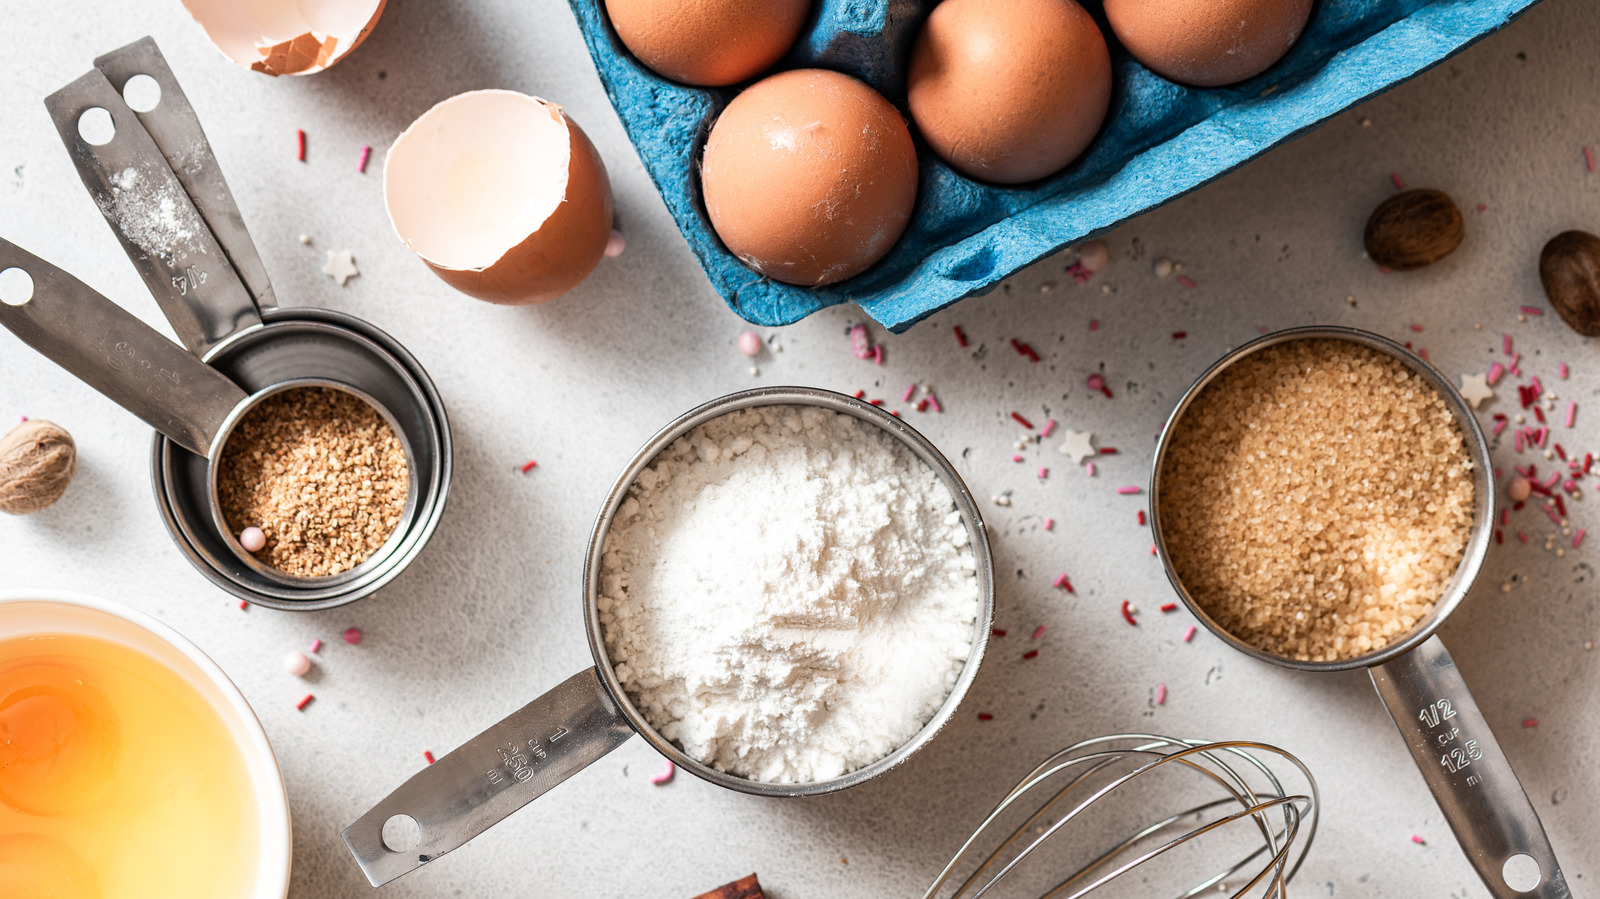 Step Up Your Baking Game by Weighing Your Ingredients